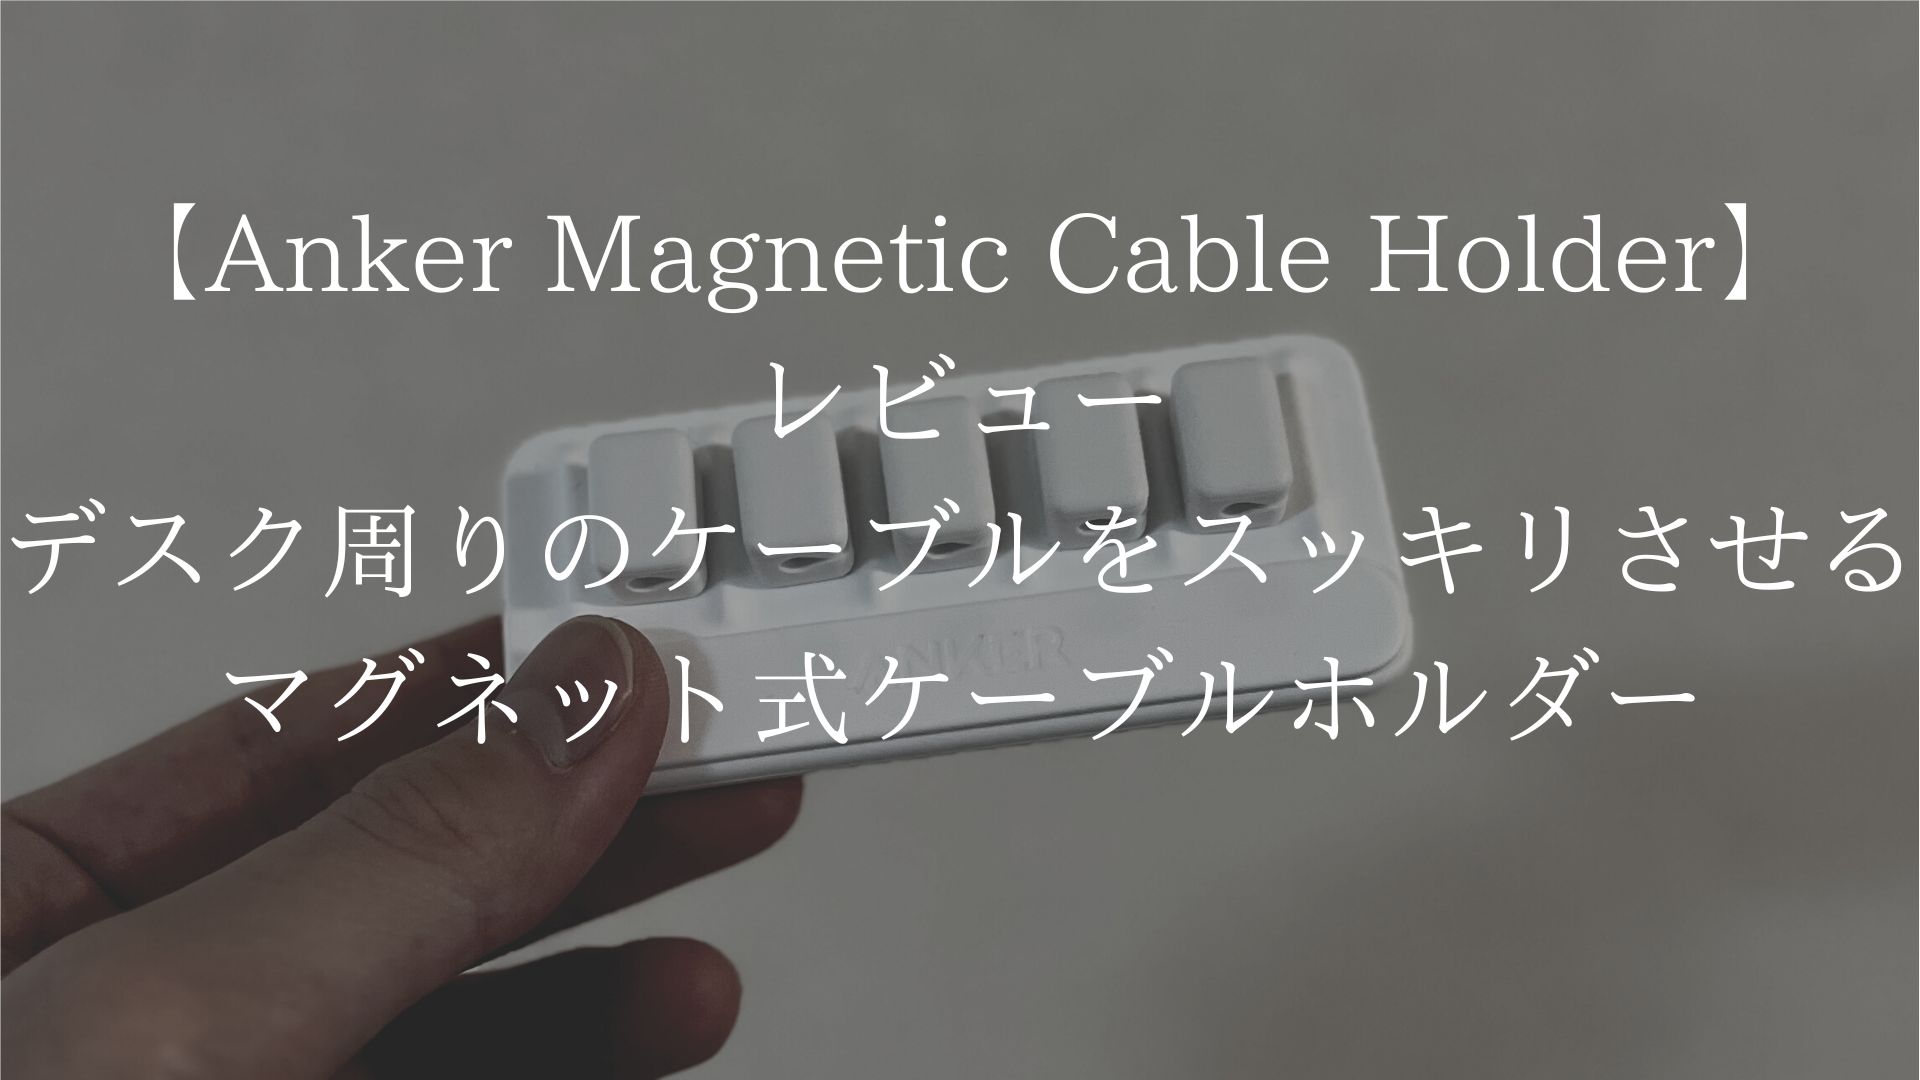 Anker Magnetic Cable Holderのアイキャッチ画像